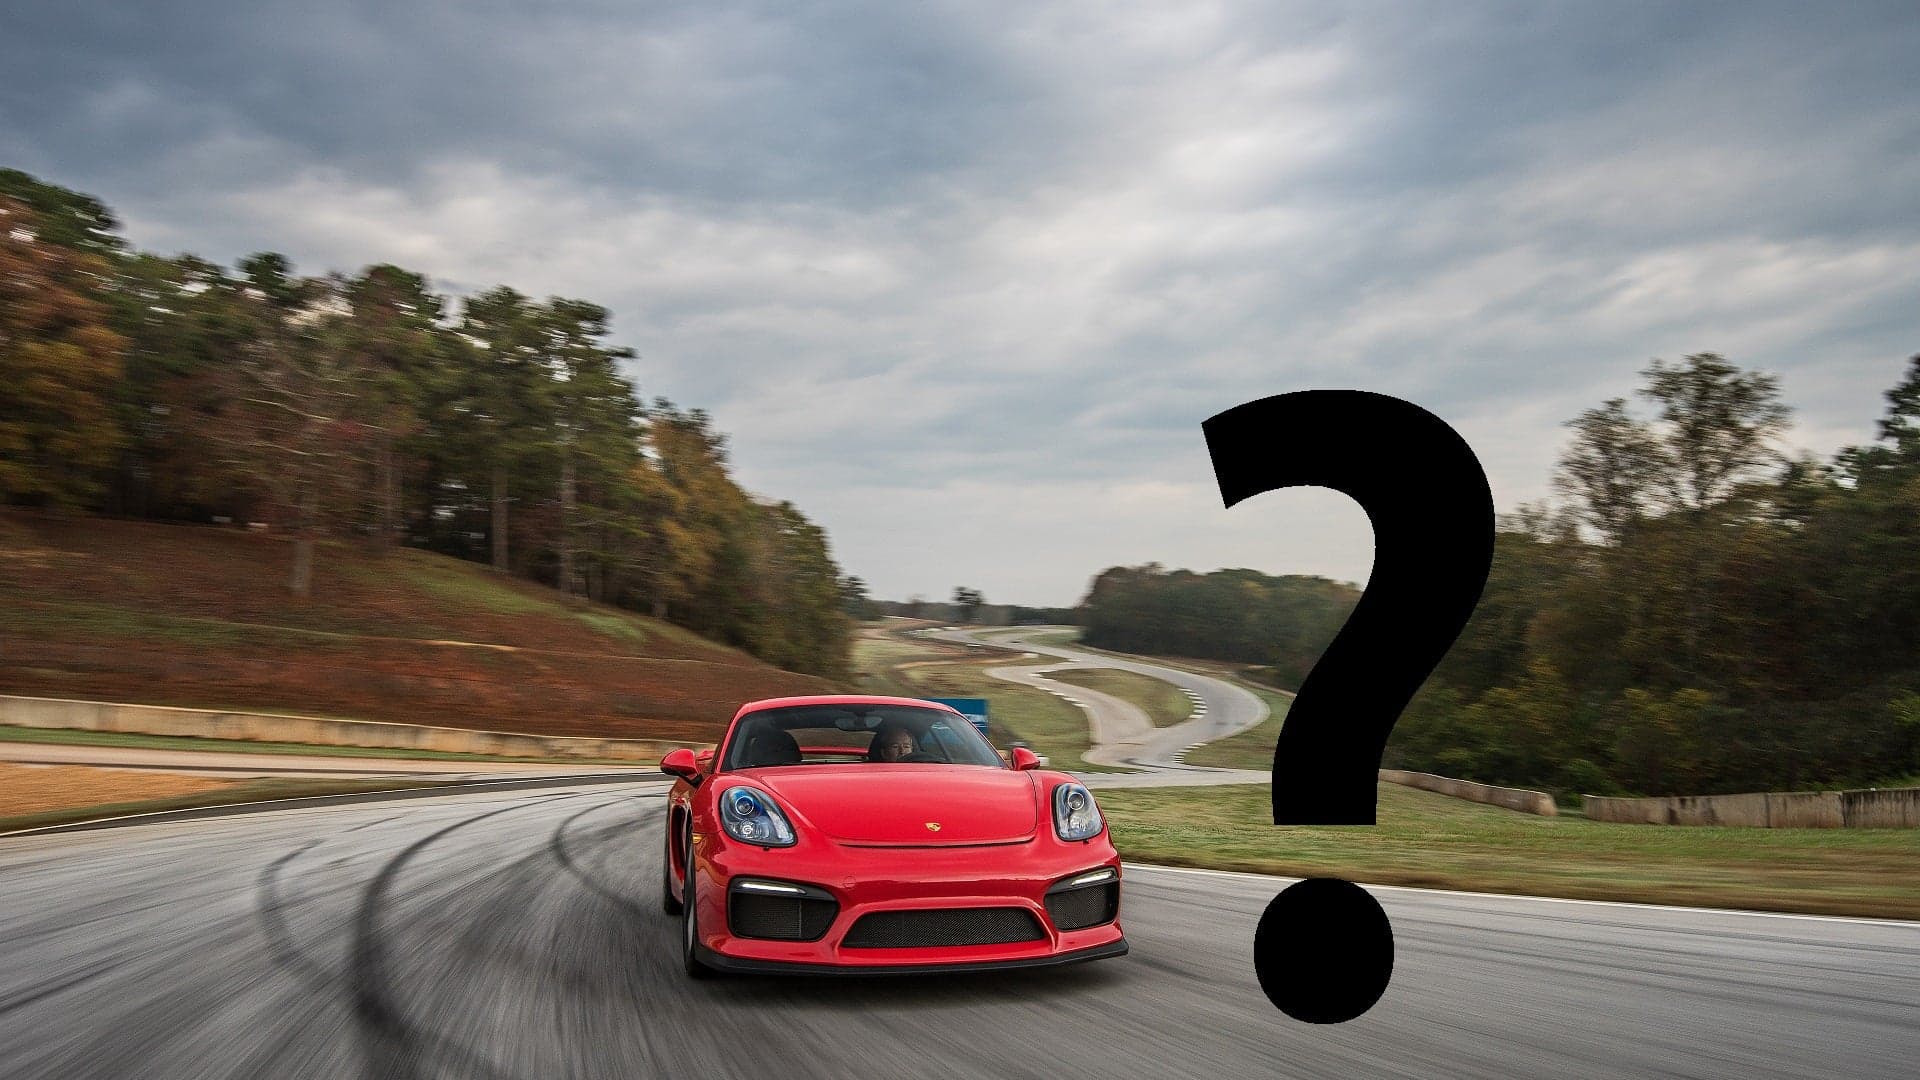 Another New Porsche To Bow At Geneva Auto Show, But What Is It?